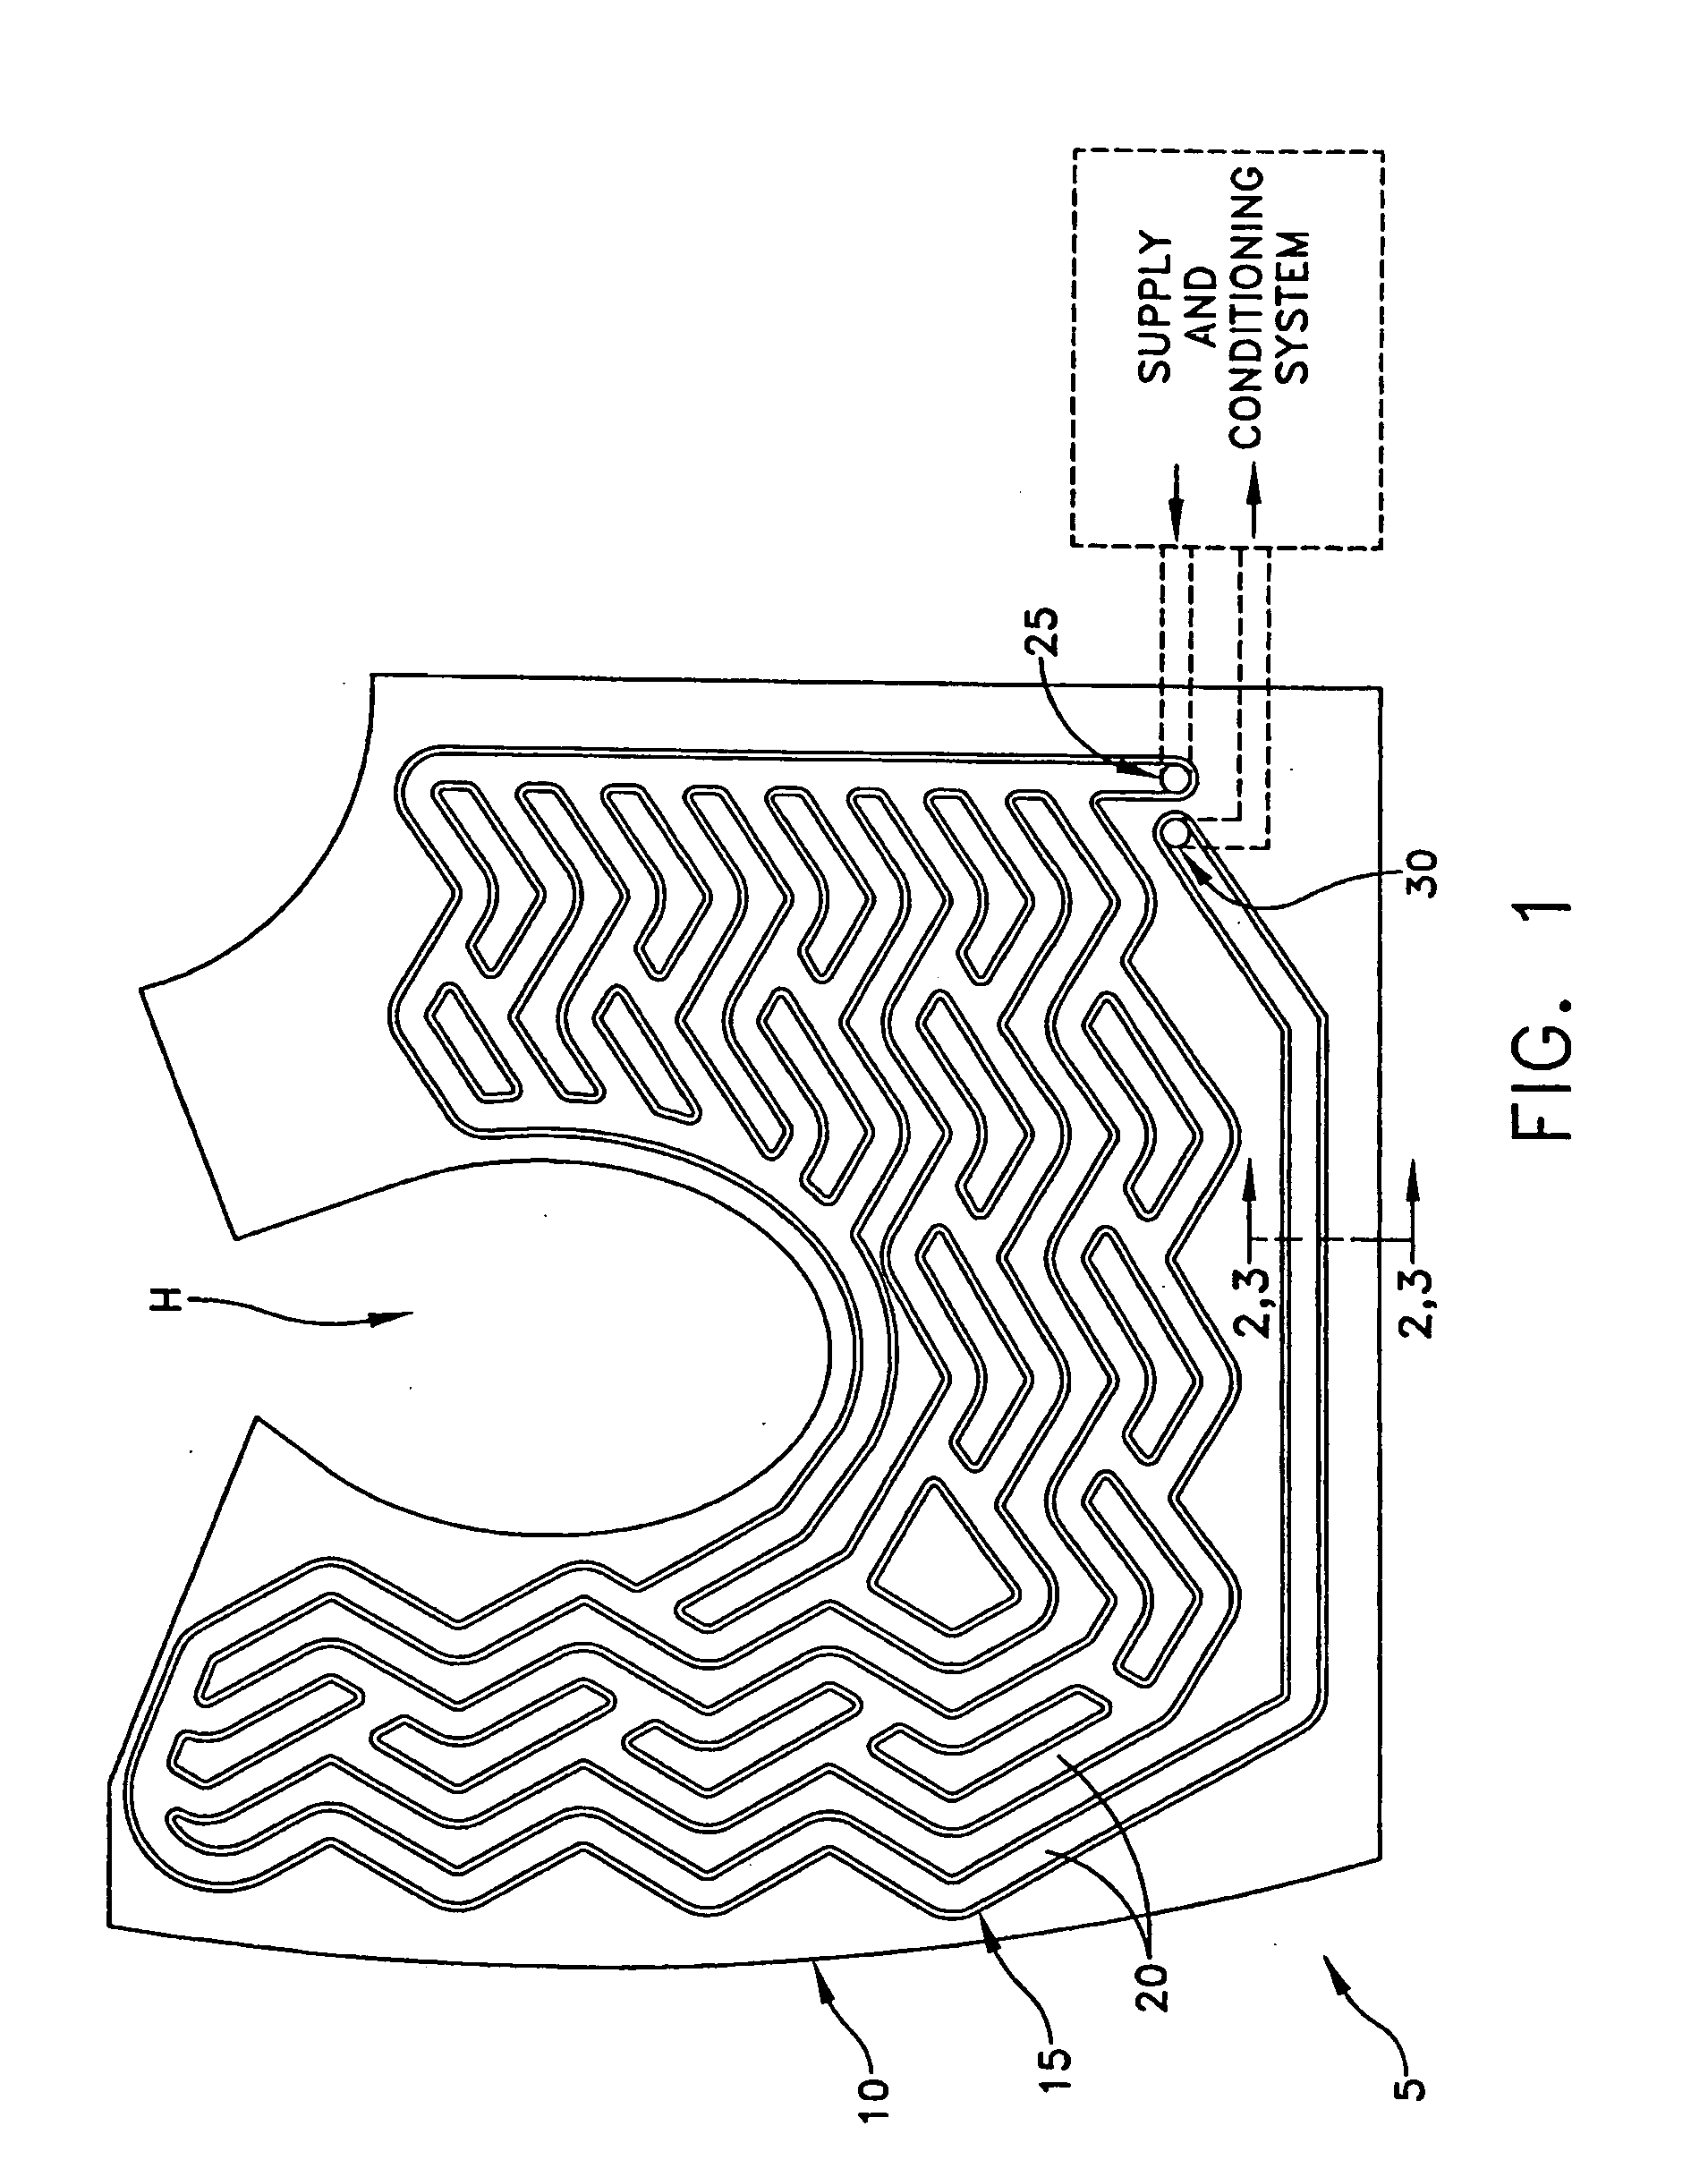 Personal cooling or warming system using closed loop fluid flow